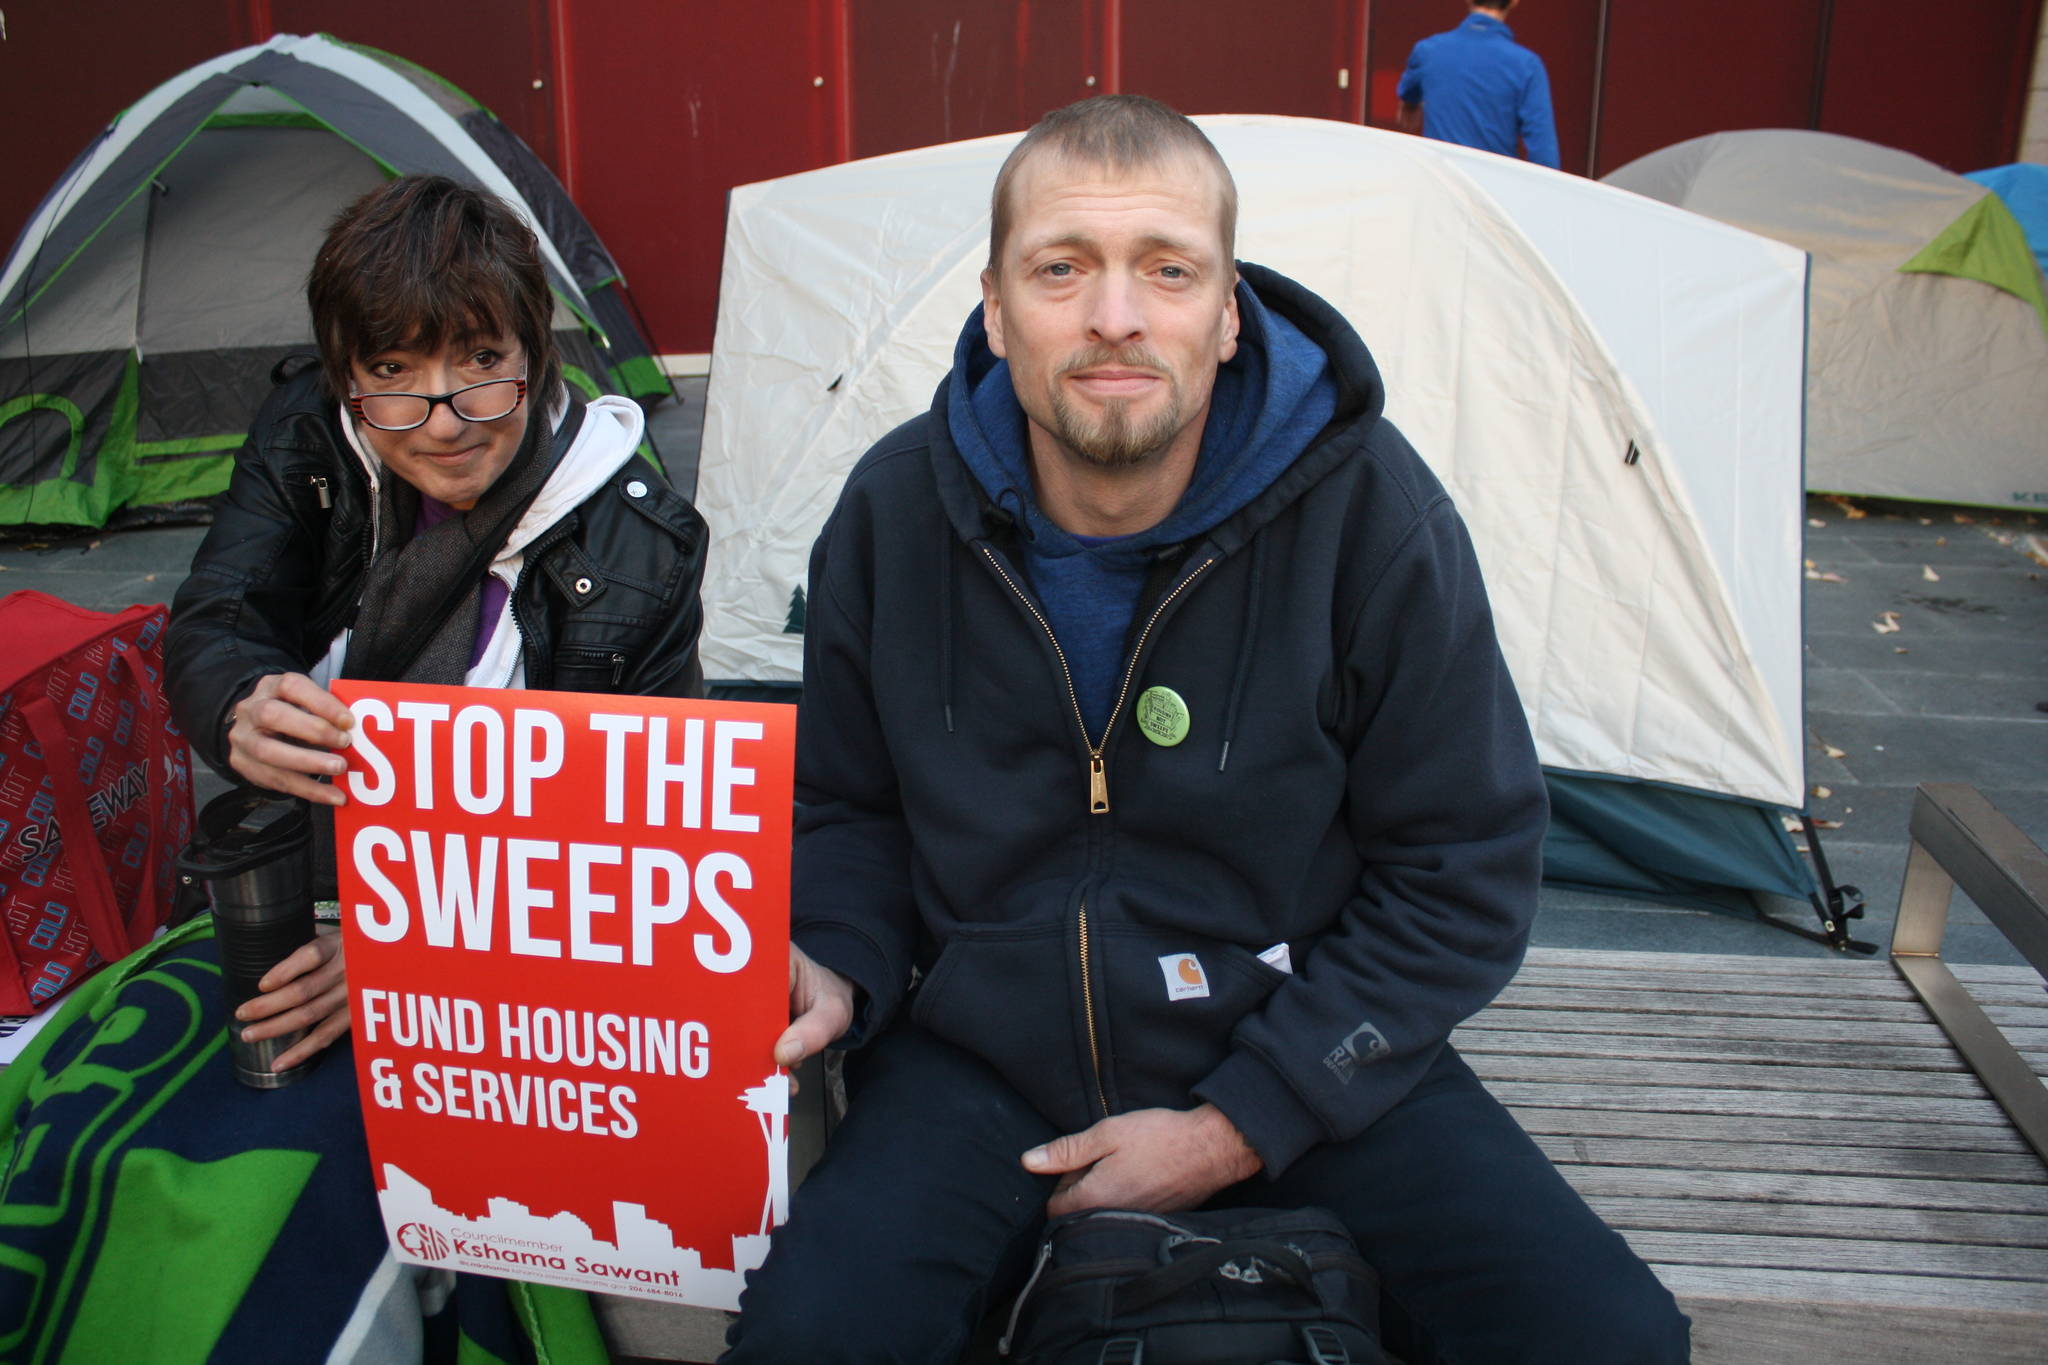 Daniel Brown, 37, has been houseless in Seattle for the past three years. He attended the protest because he said he’s “desperate for change in my own life.” Photos by Melissa Hellmann